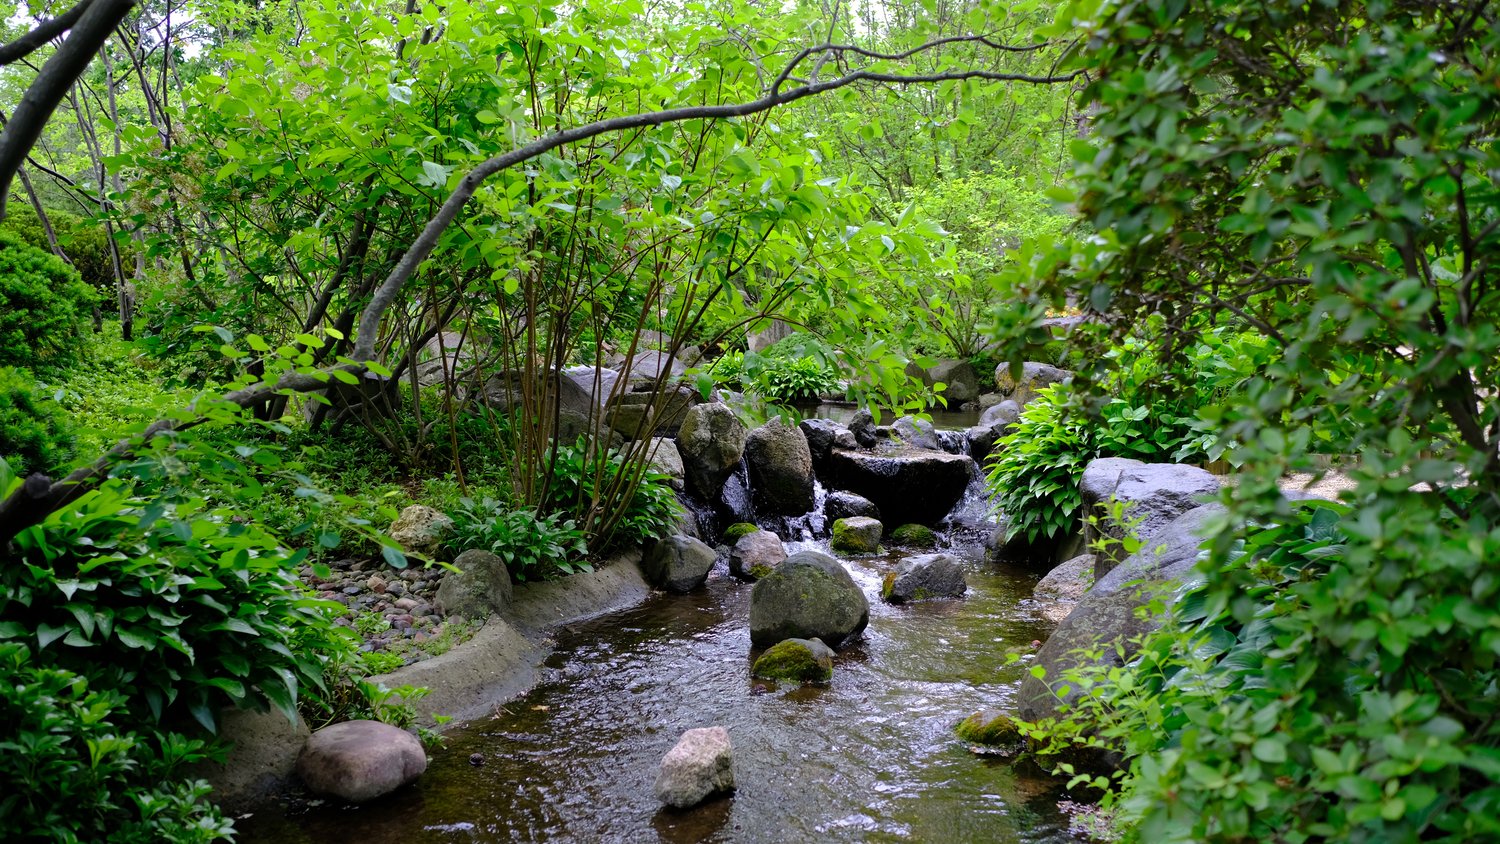 View of a small brook running through Anderson Japanese Gardens.